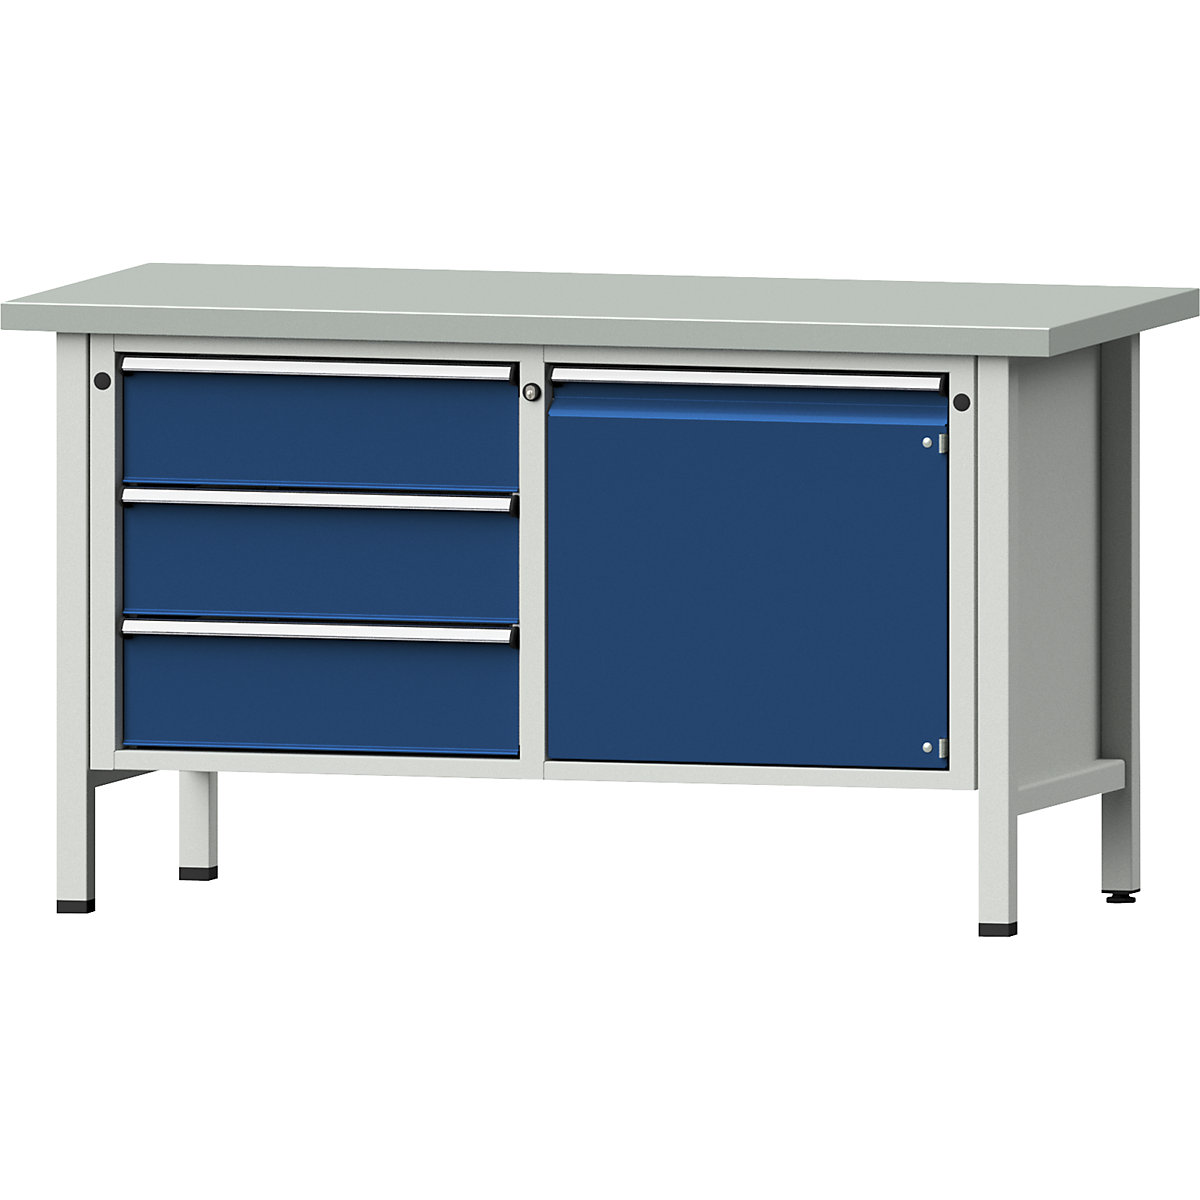 Workbench, frame construction – ANKE, 3 drawers, door 540 mm, sheet steel covering, partial extension-11